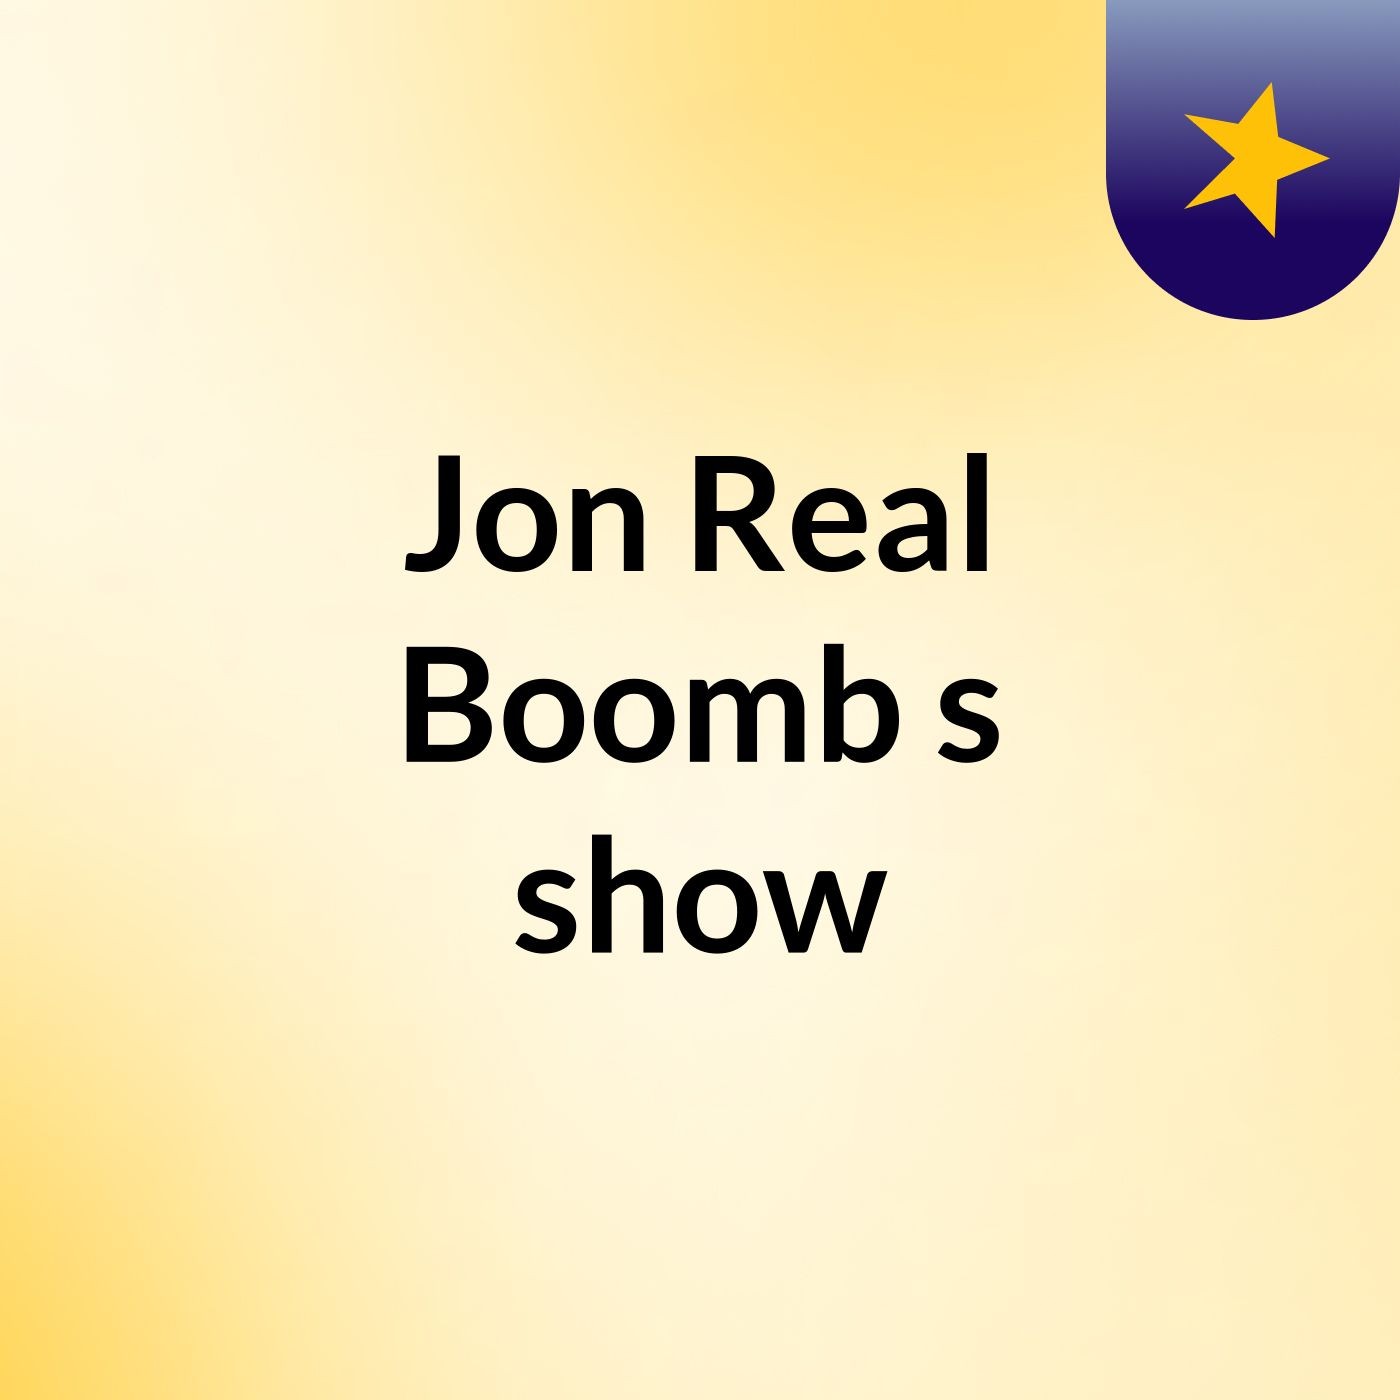 Episode 12 - Jon Real Boomb's show